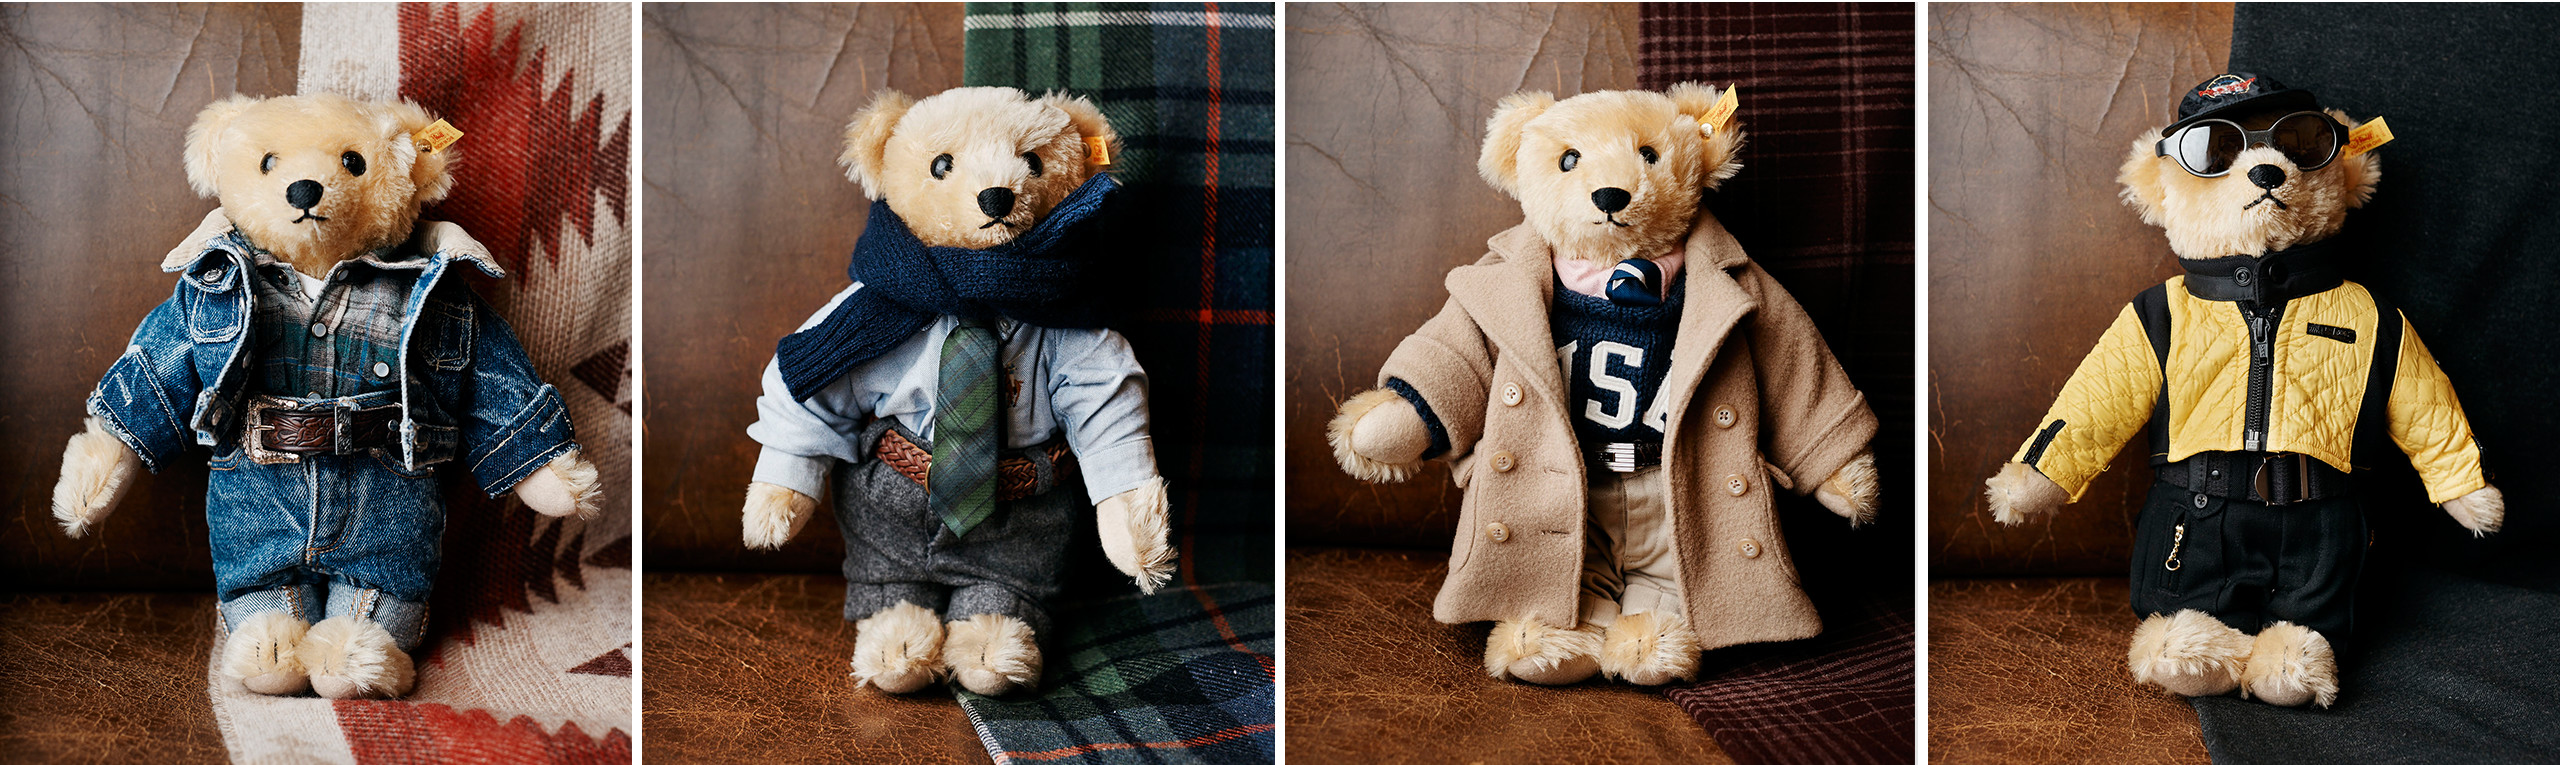 Ralph Lauren Polo Bears Are Timeless and Worth the Splurge